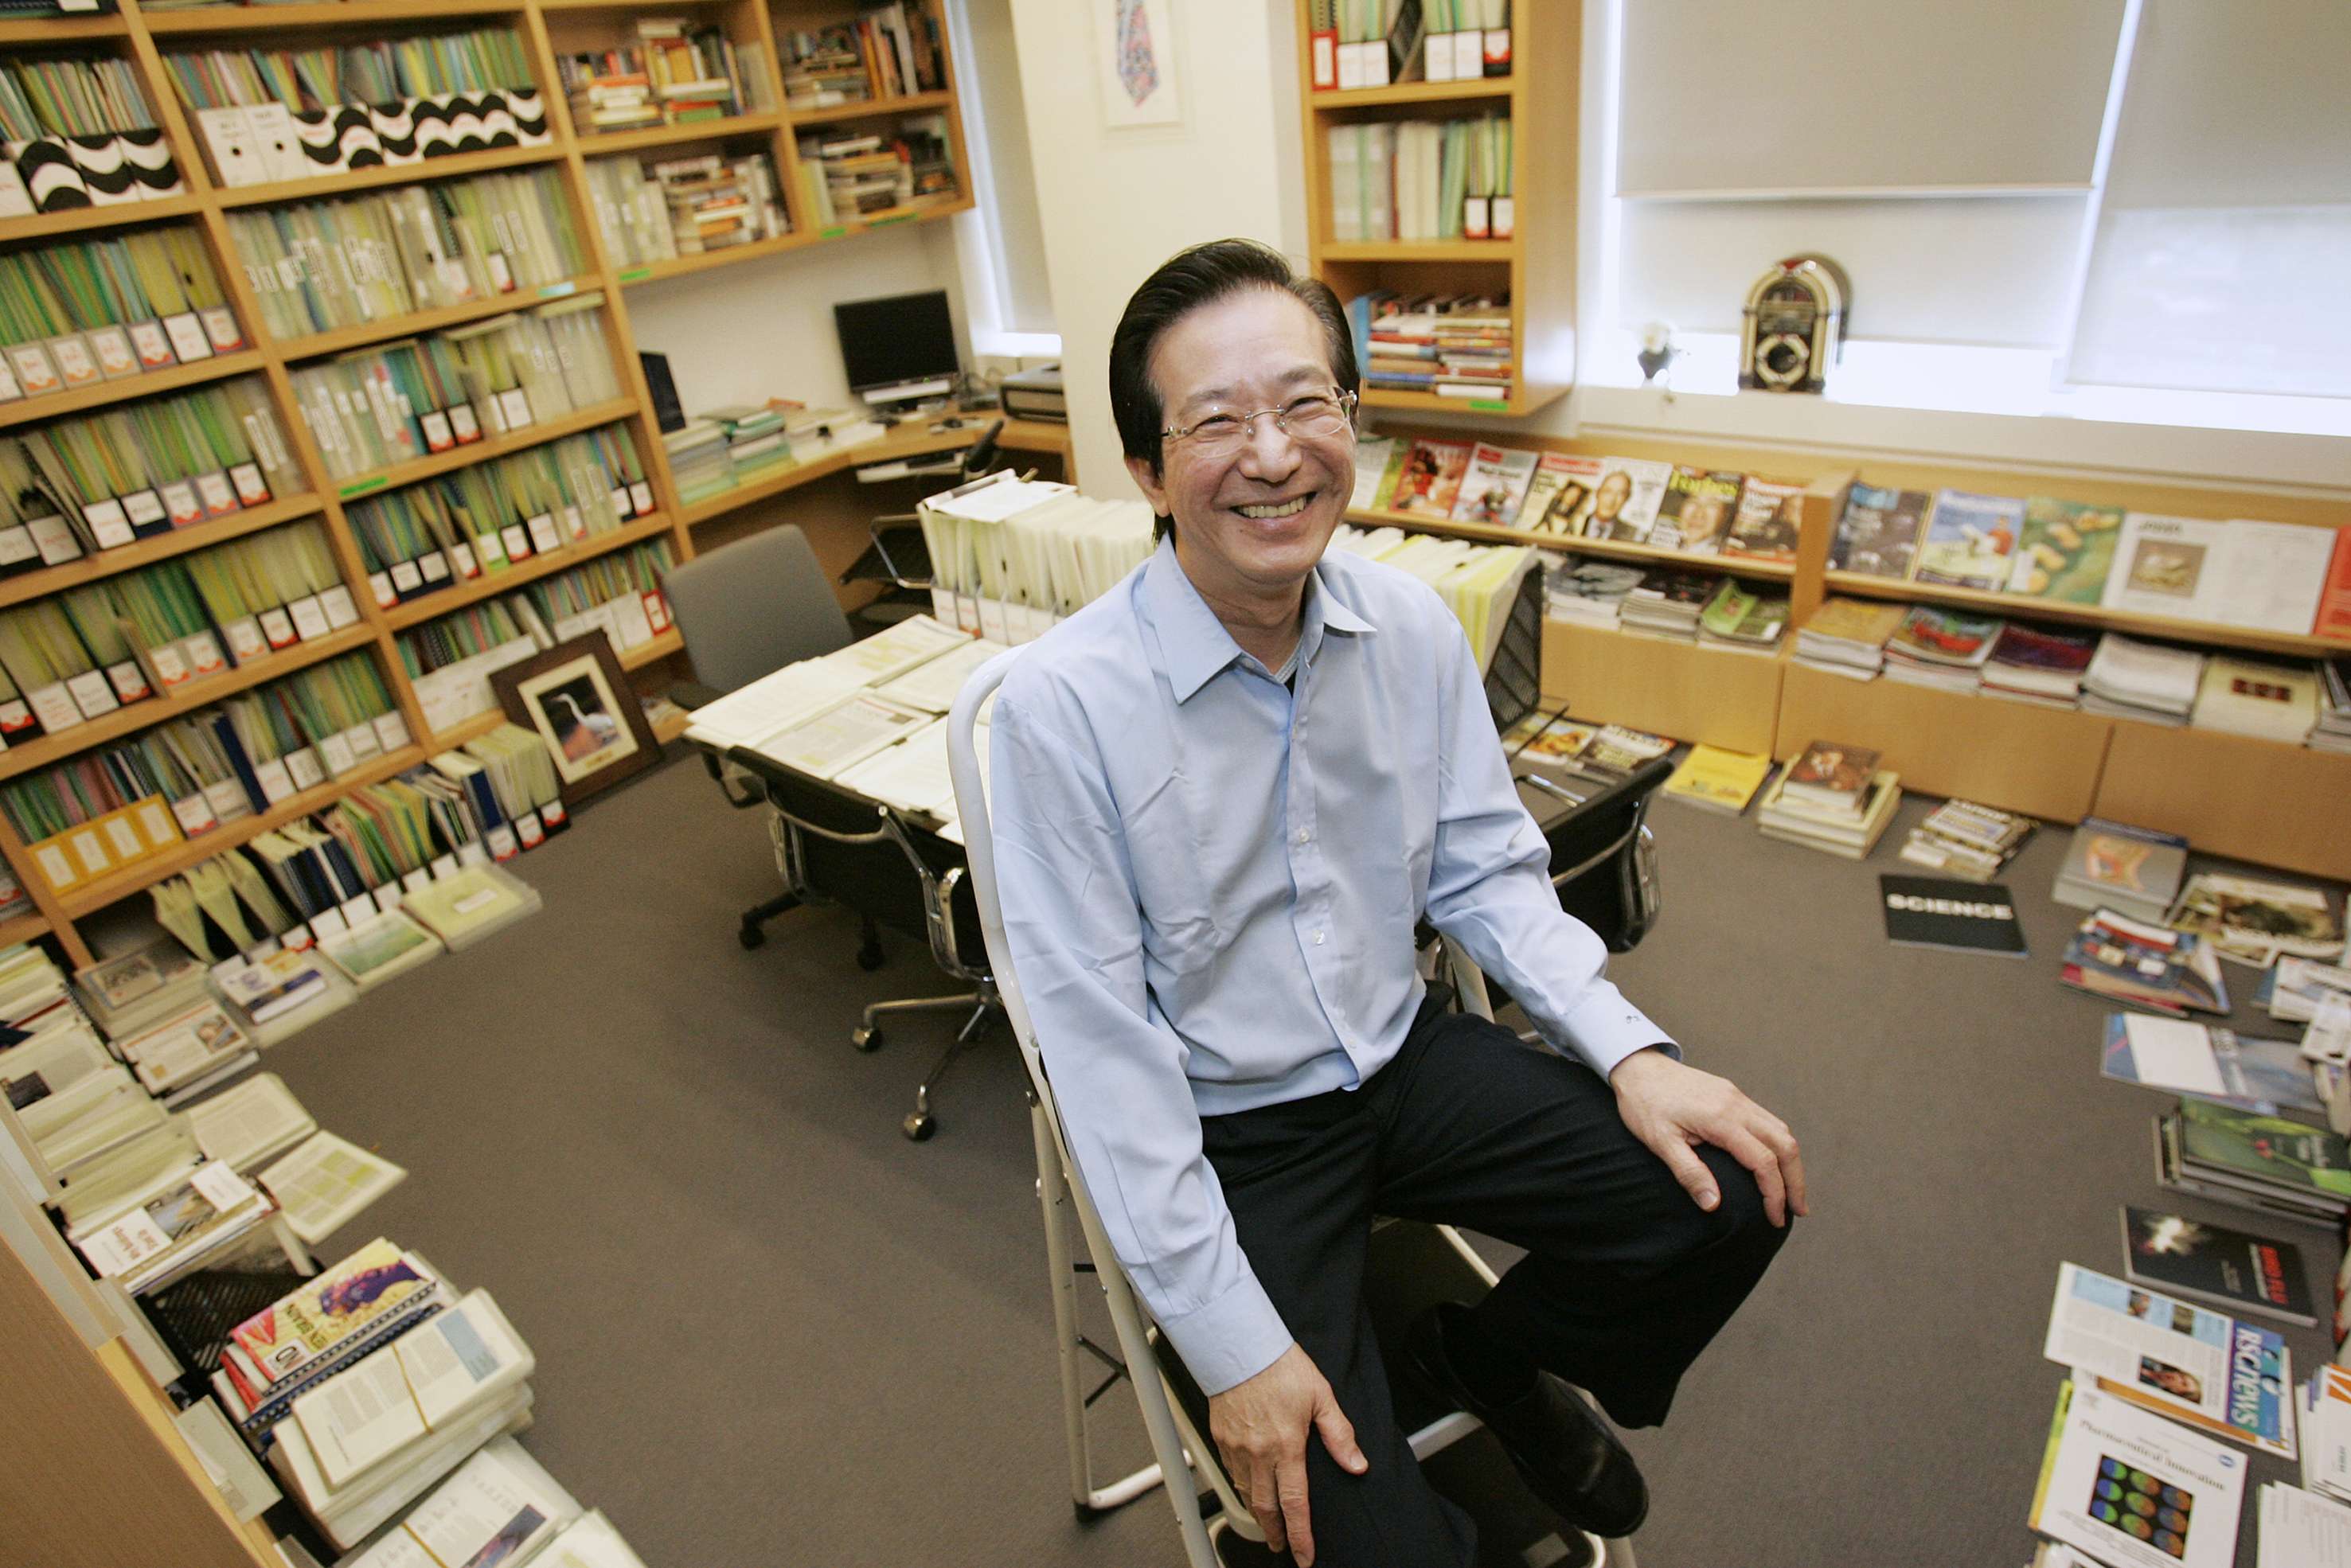 Philip Yeo, Singapore’s former economic tsar, is a former school librarian who has retained his love of books. Photo: Singapore Press Holdings